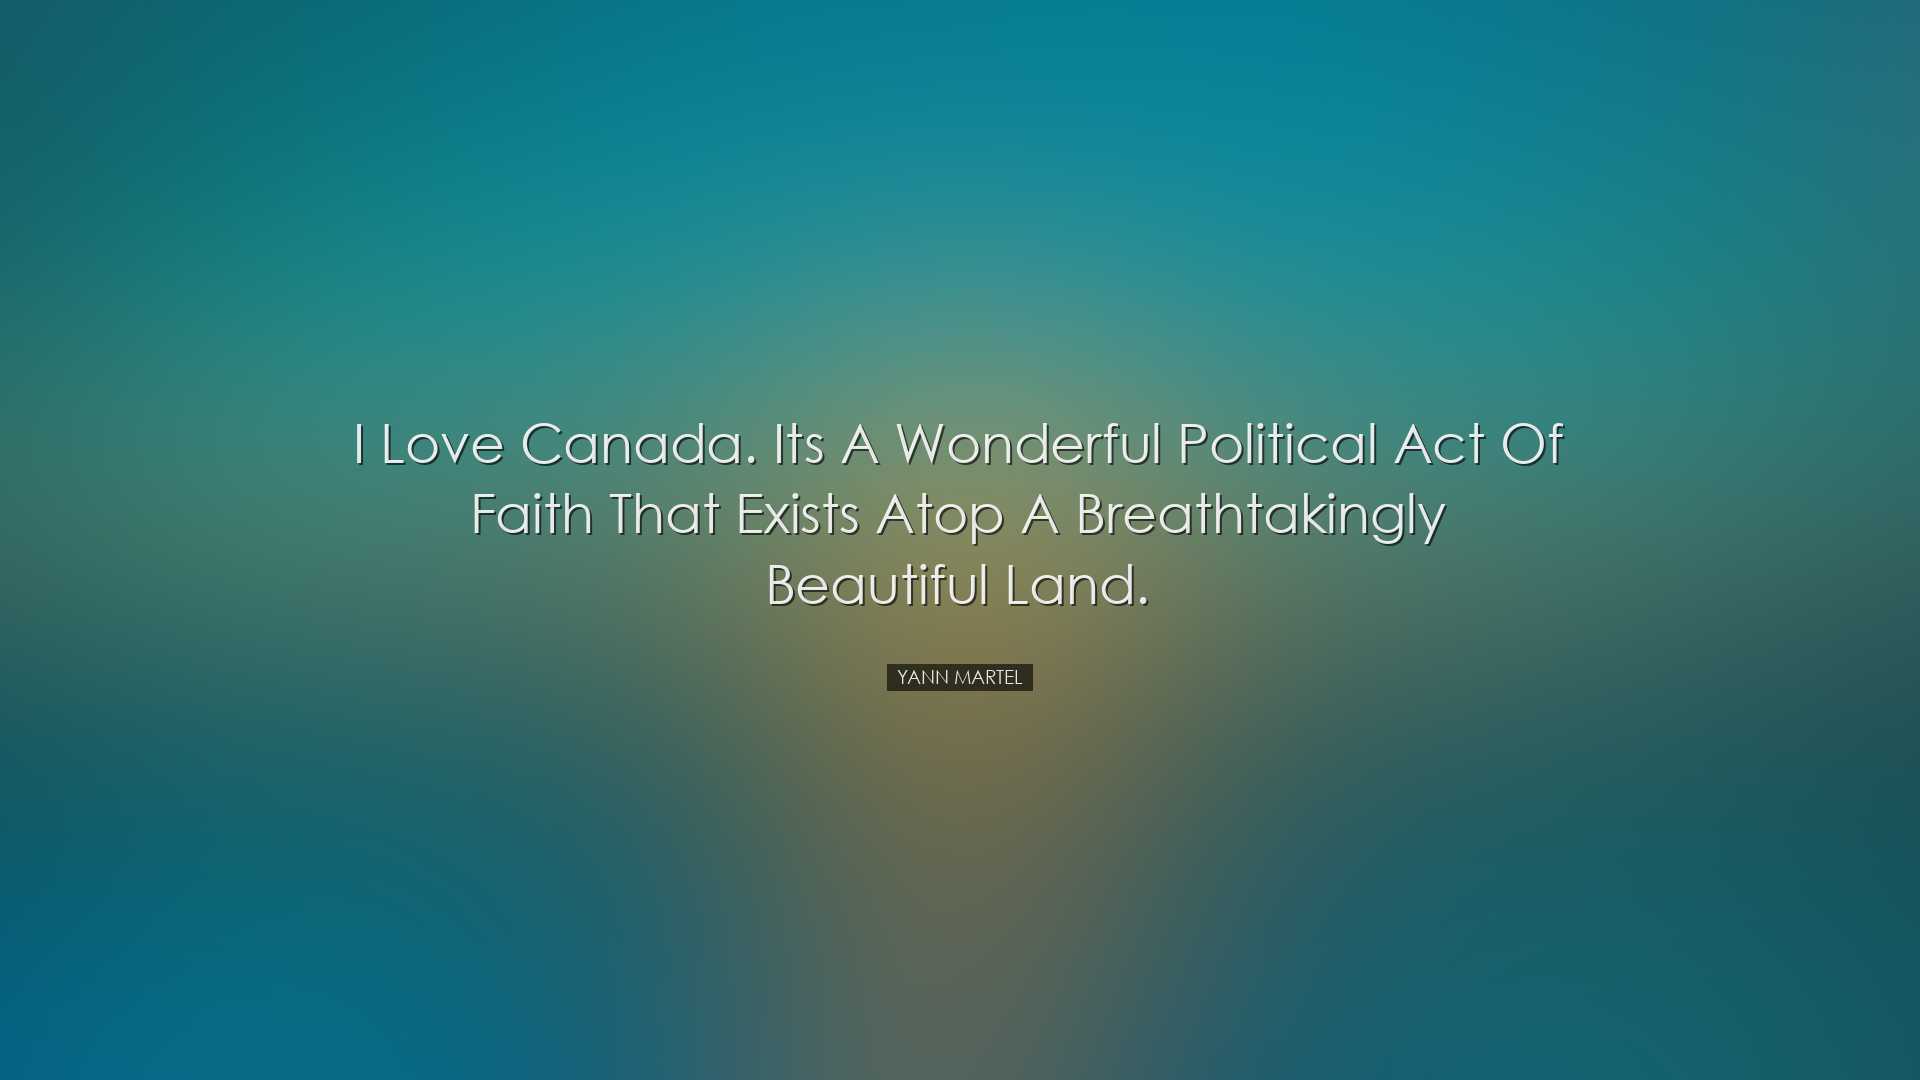 I love Canada. Its a wonderful political act of faith that exists